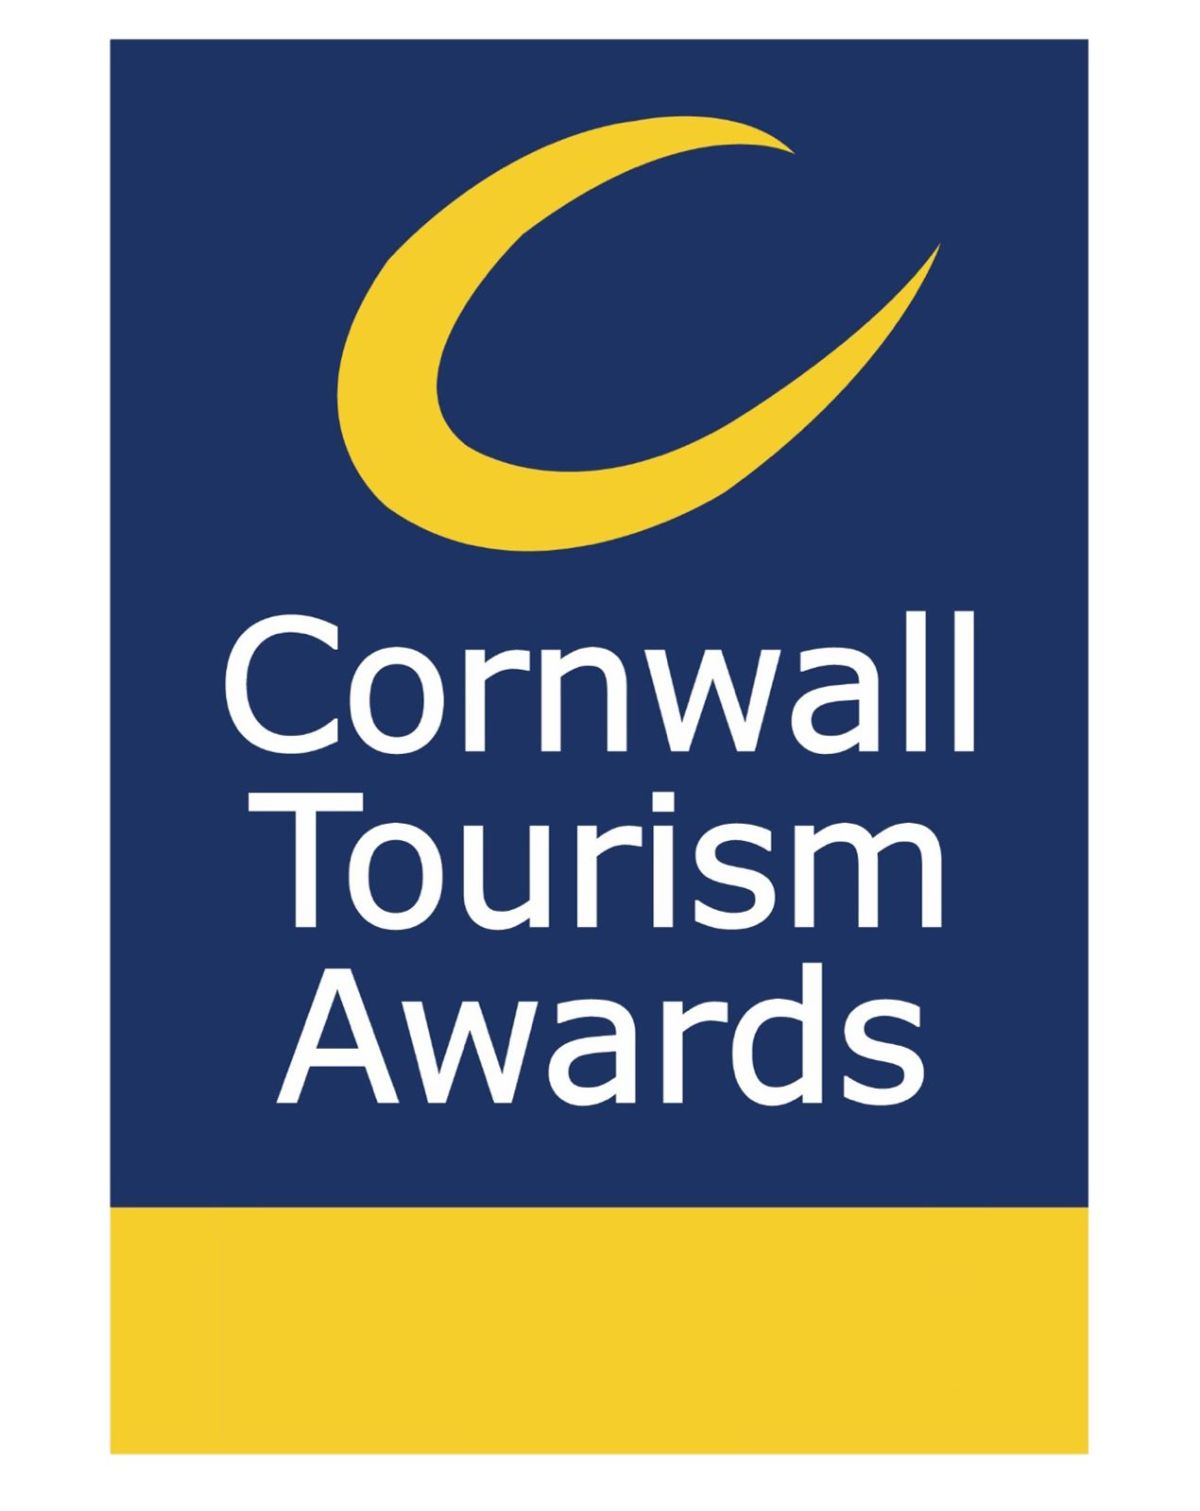 Bronze - Cornwall Tourism Awards, Dog-Friendly Business of the Year 2021/2022